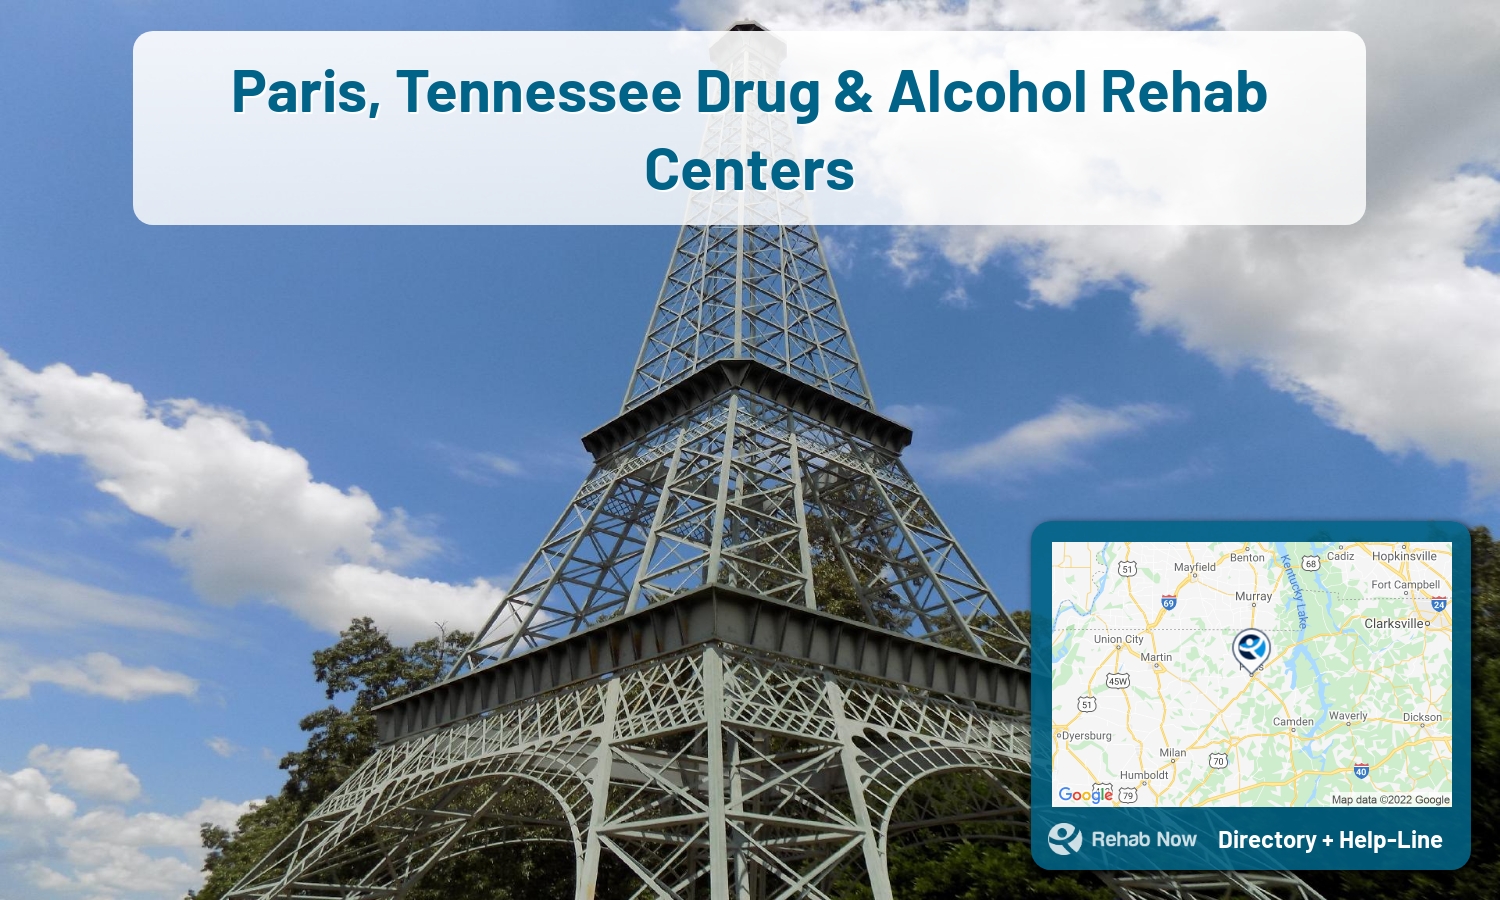 Paris, TN Treatment Centers. Find drug rehab in Paris, Tennessee, or detox and treatment programs. Get the right help now!